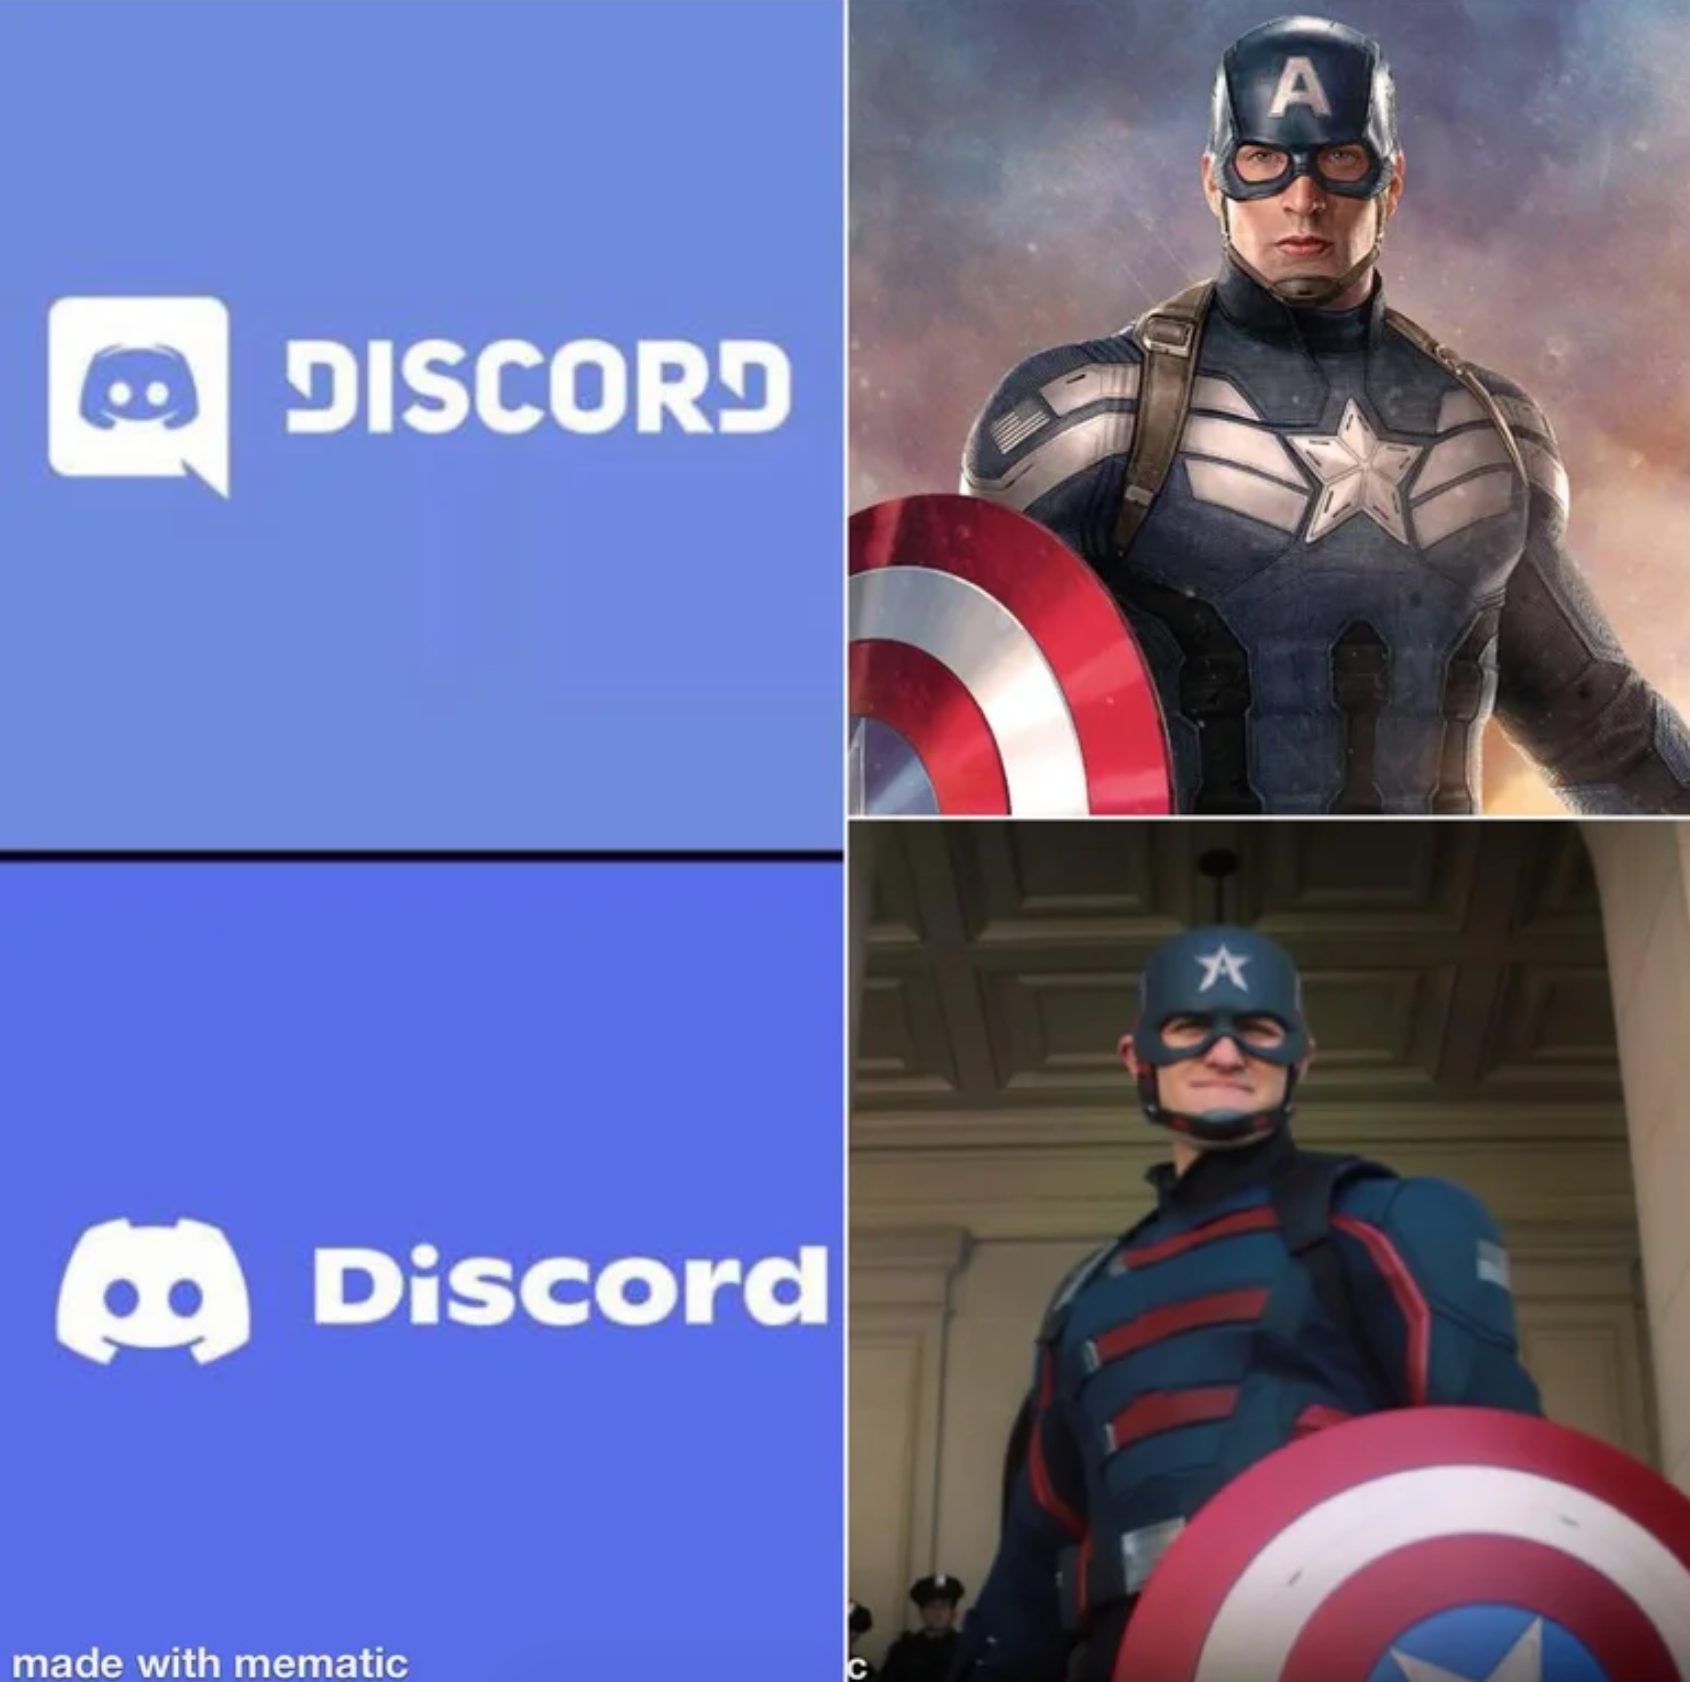 funny gaming memes - discord - A Discord Discord made with mematic